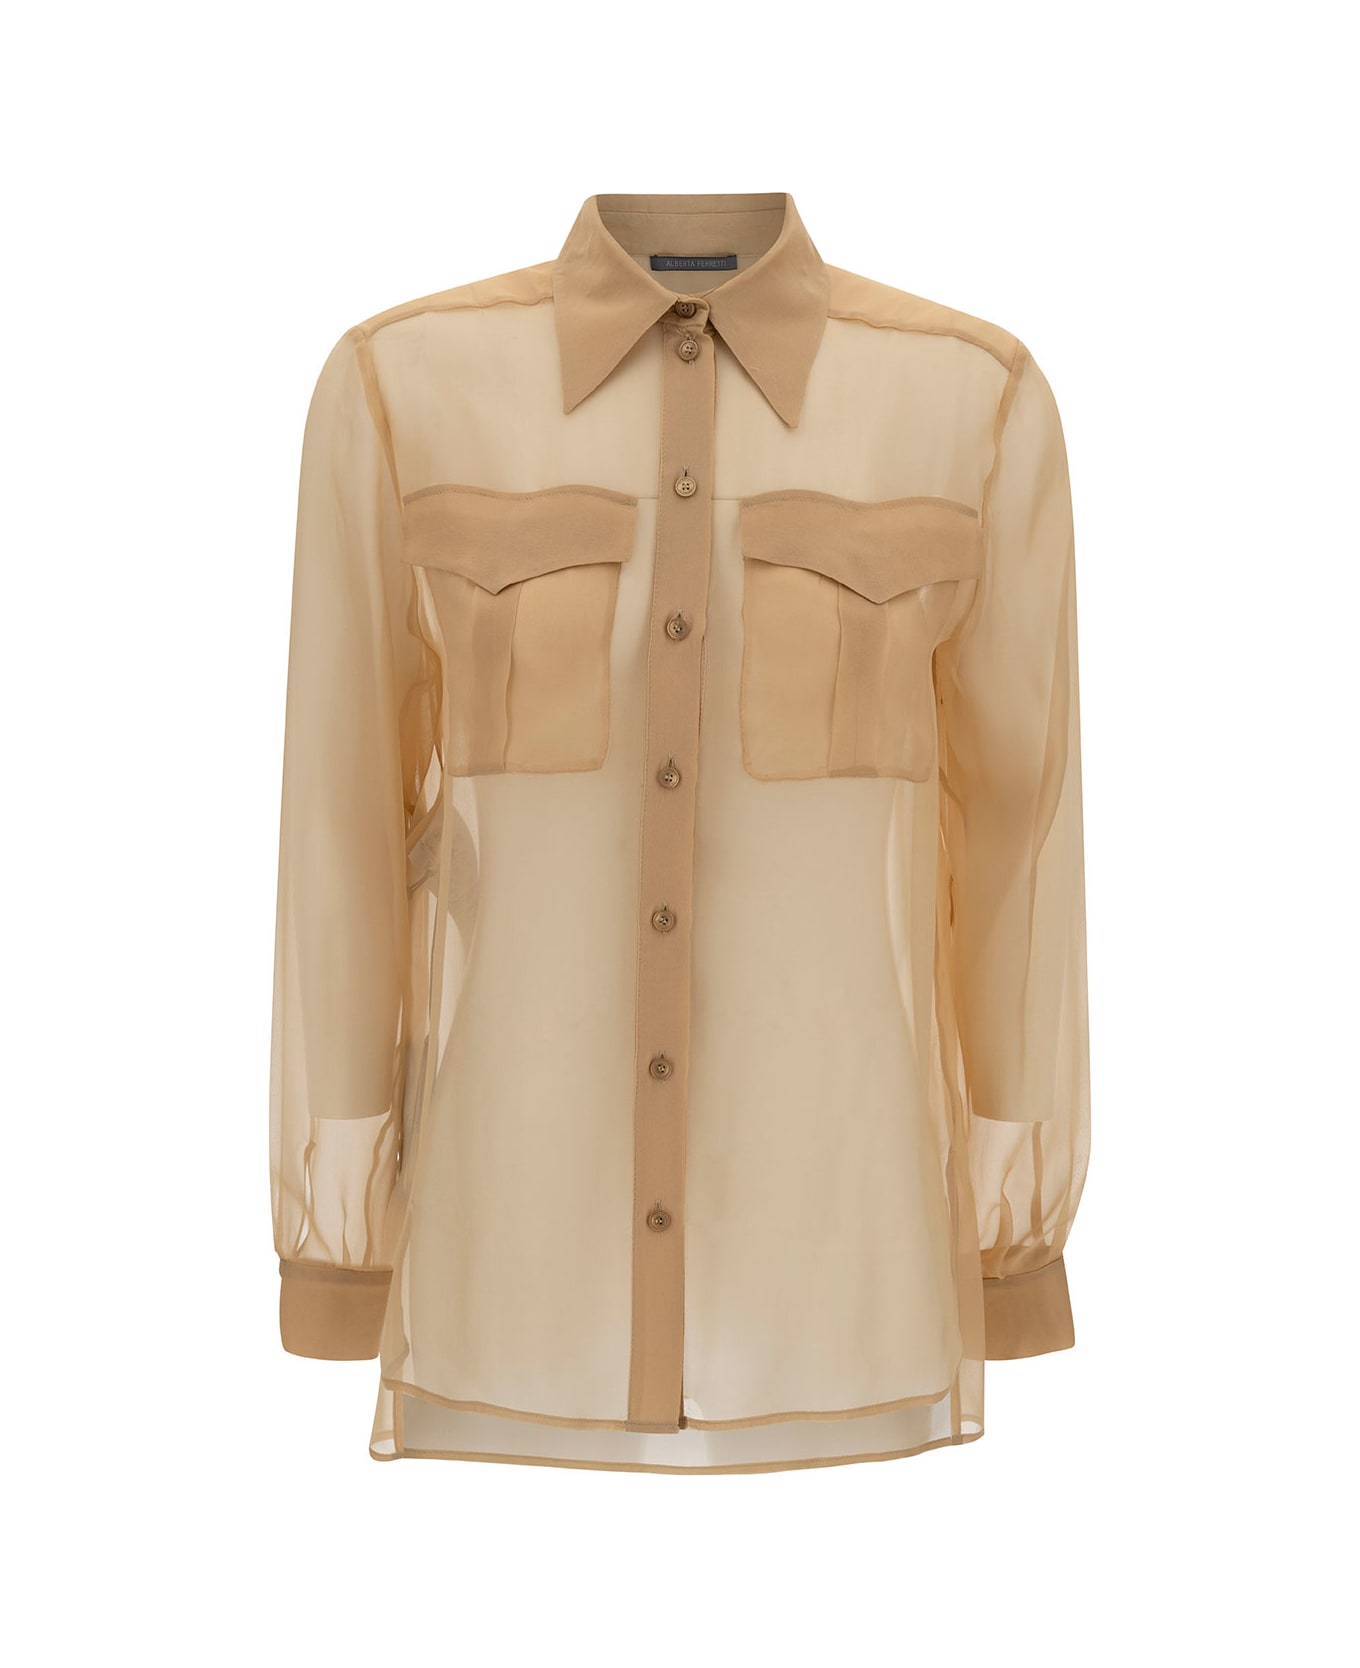 Alberta Ferretti Beige Shirt With Pointed Collar And Patch Pockets In Silk Chiffon Woman - Beige